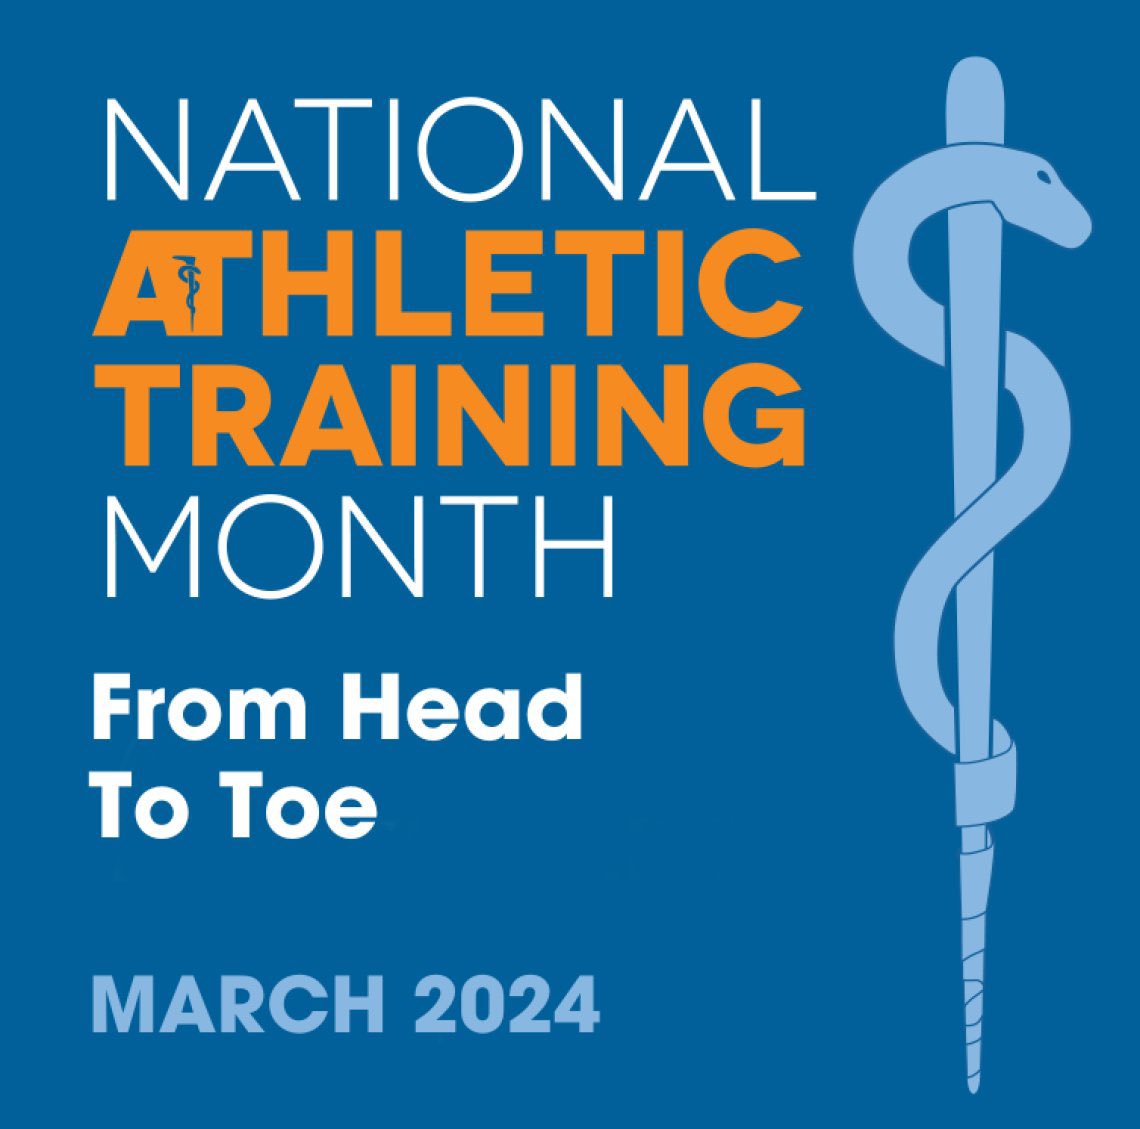 March is National Athletic Training Month! The Division of Sports Medicine is so proud of the dedication and the high quality health care our ATs provide daily. Stay tuned this month for those highlights !